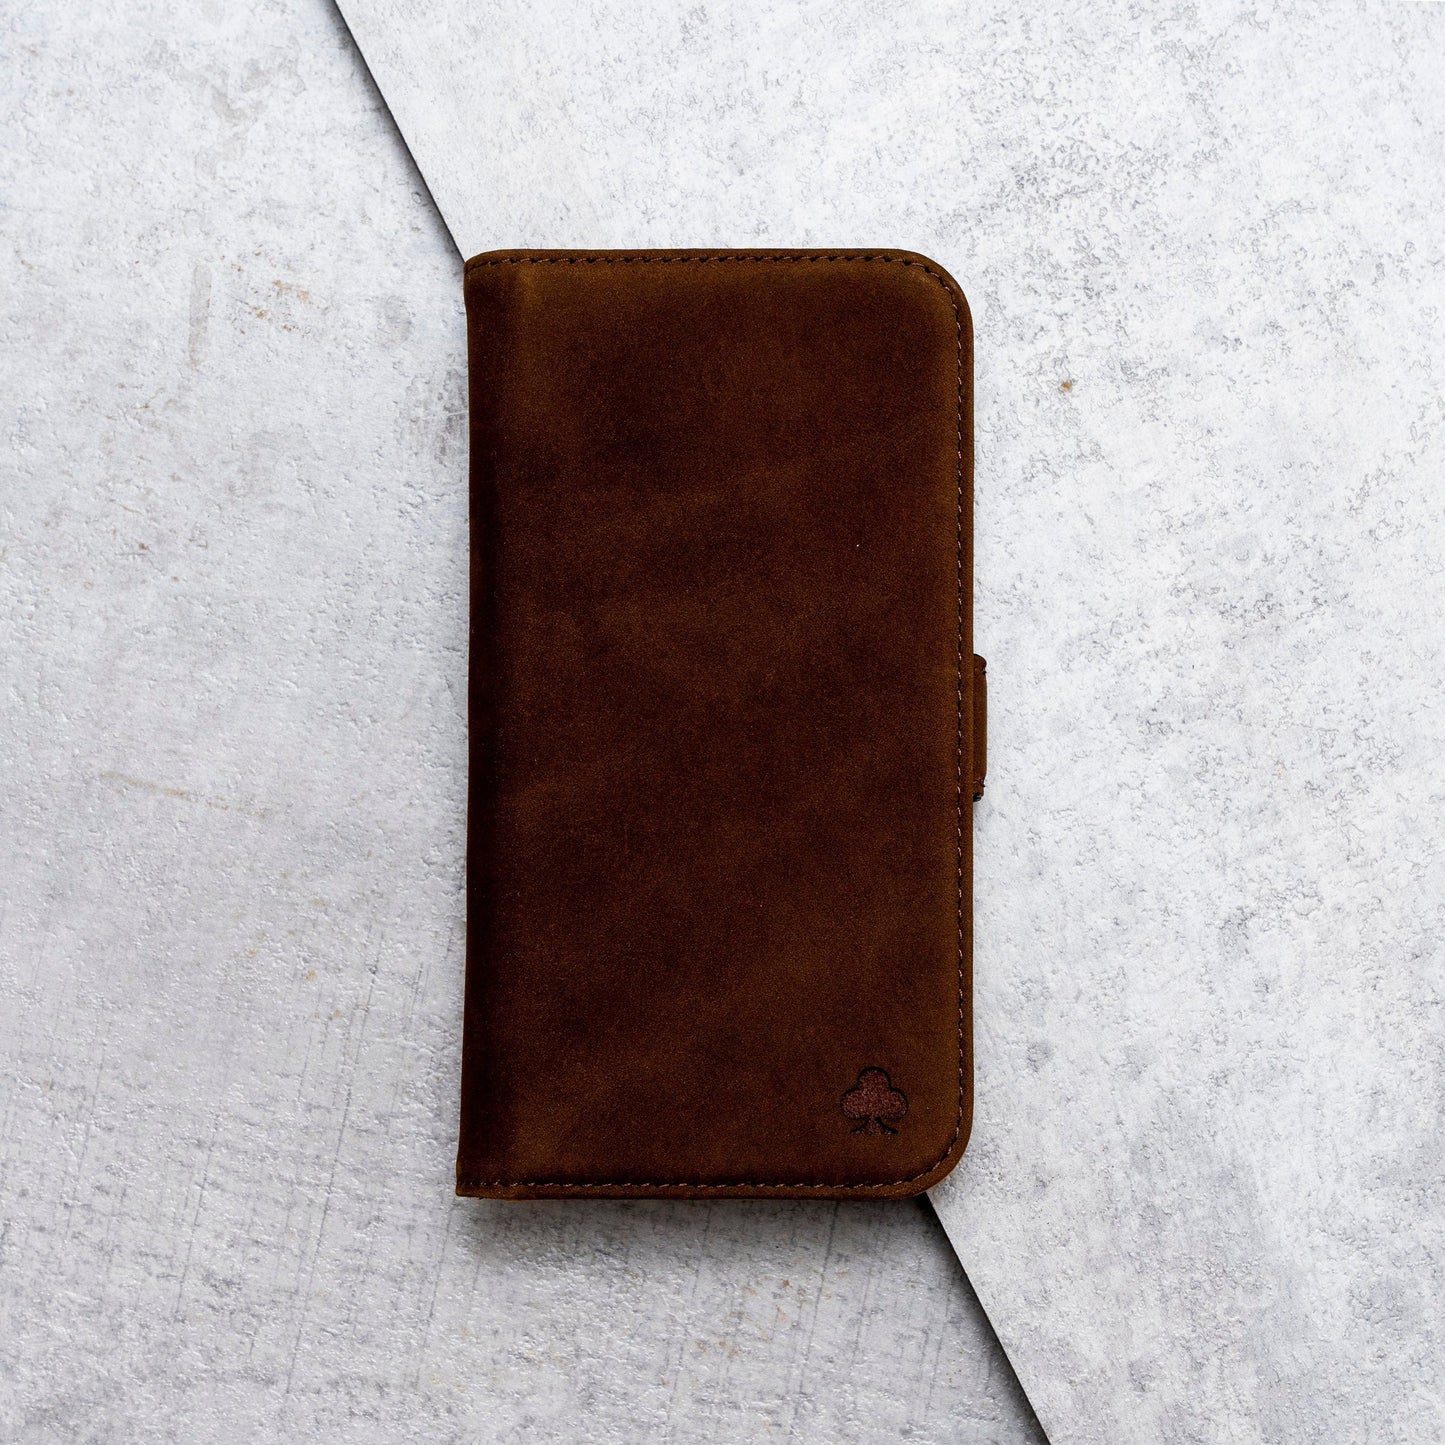 iPhone 12 / iPhone 12 Pro Leather Case. Premium Nubuck Genuine Leather Stand Case/Cover/Wallet (Chocolate Brown)